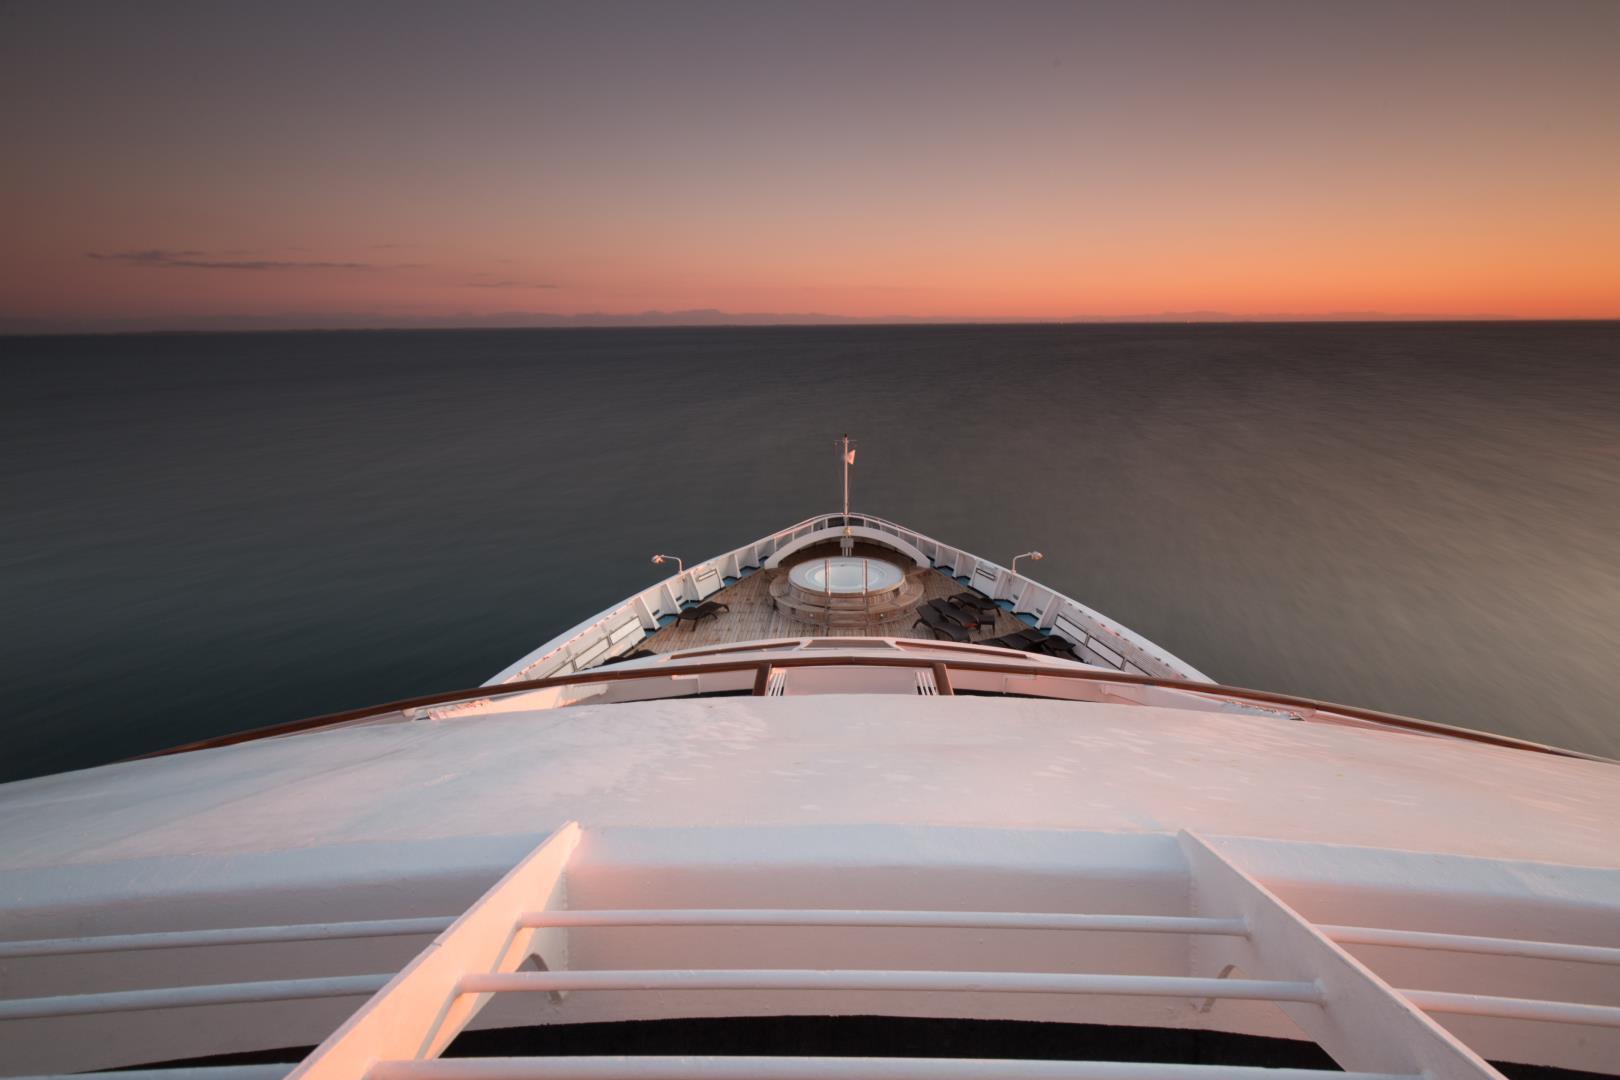 View from the bow of Star Breeze at sunset - Photo Credit: John Greengo